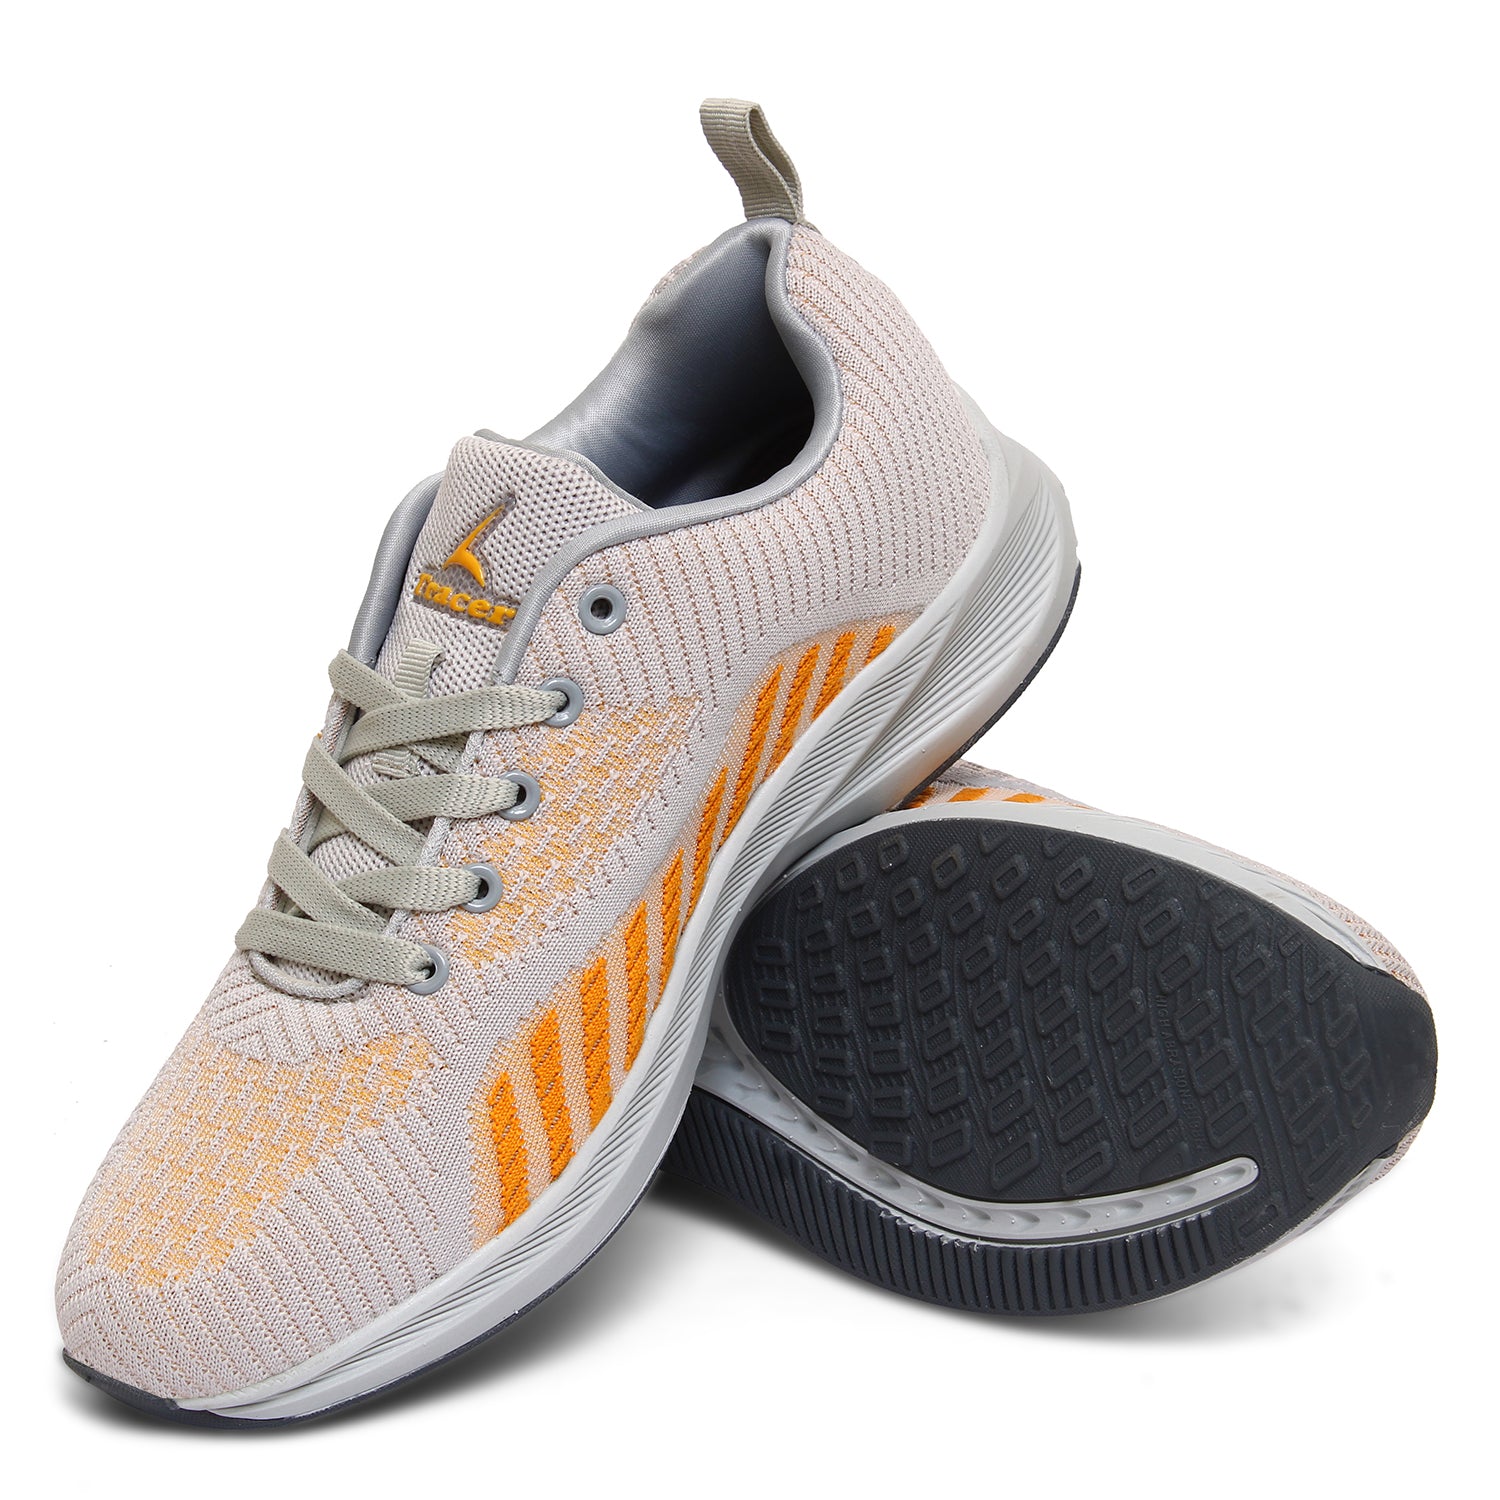 Tracer Victory 1544 Men's Running Shoes GREY